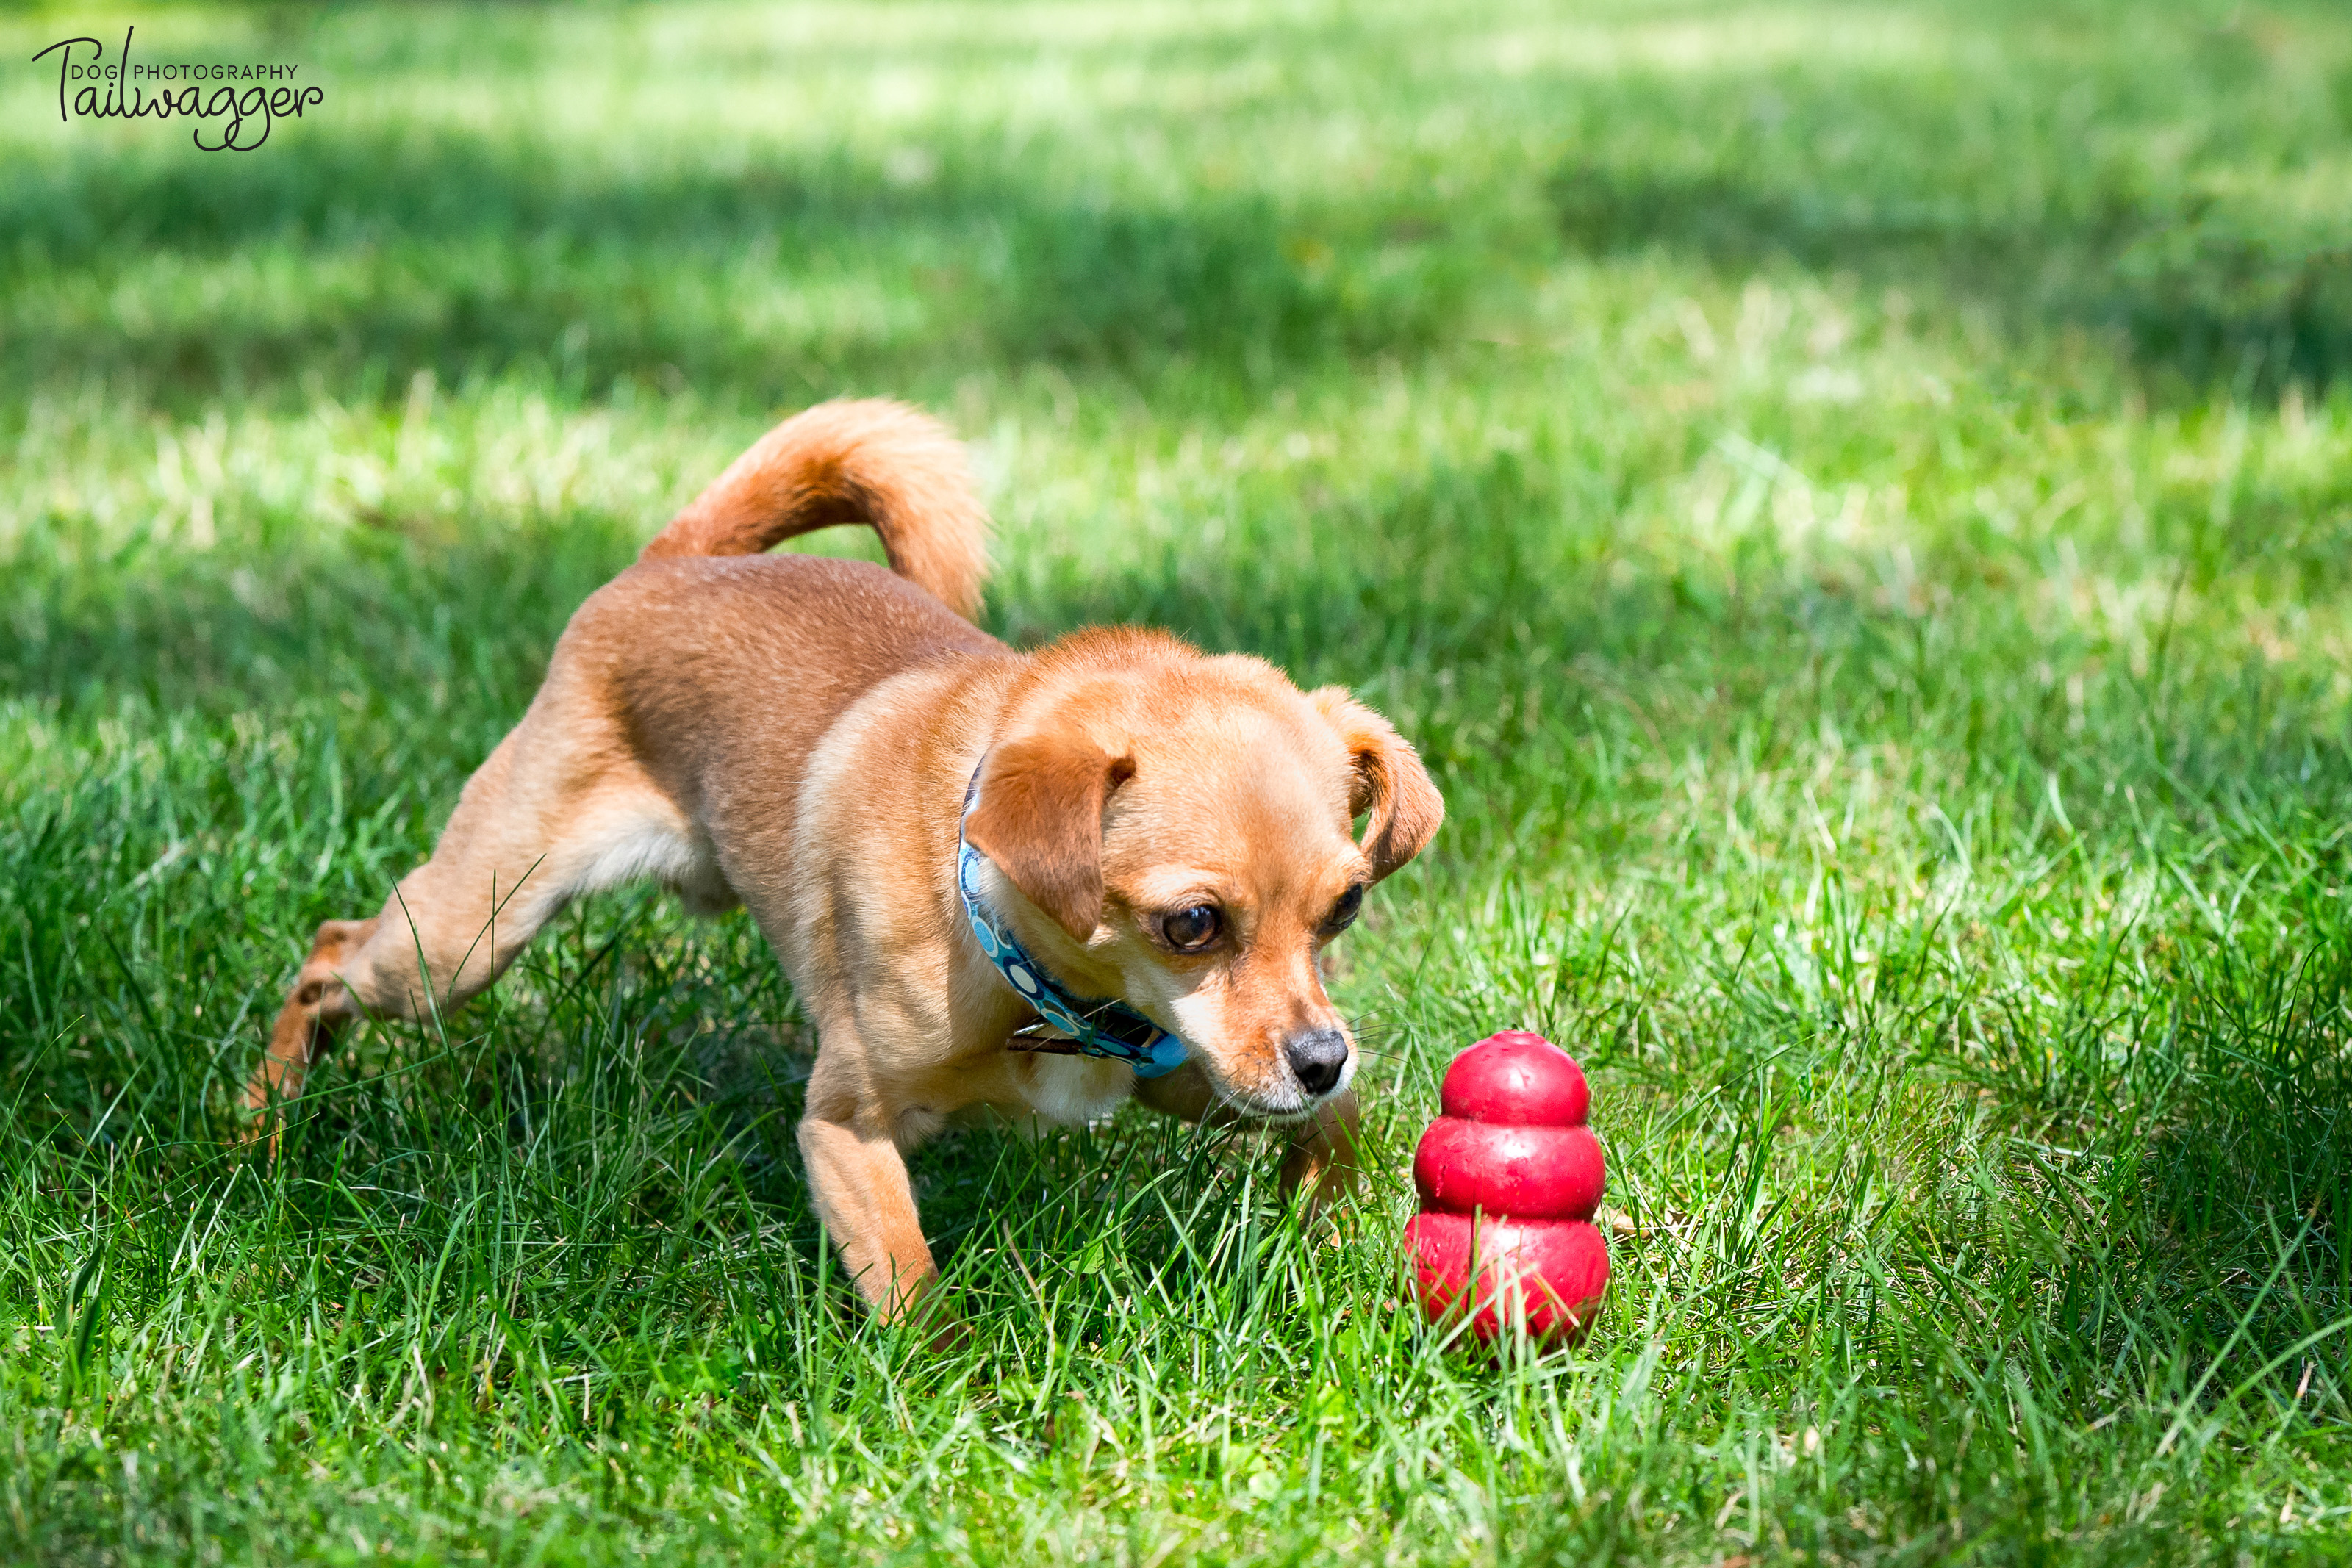 Chihuahua playing in the grass with a red Kong.